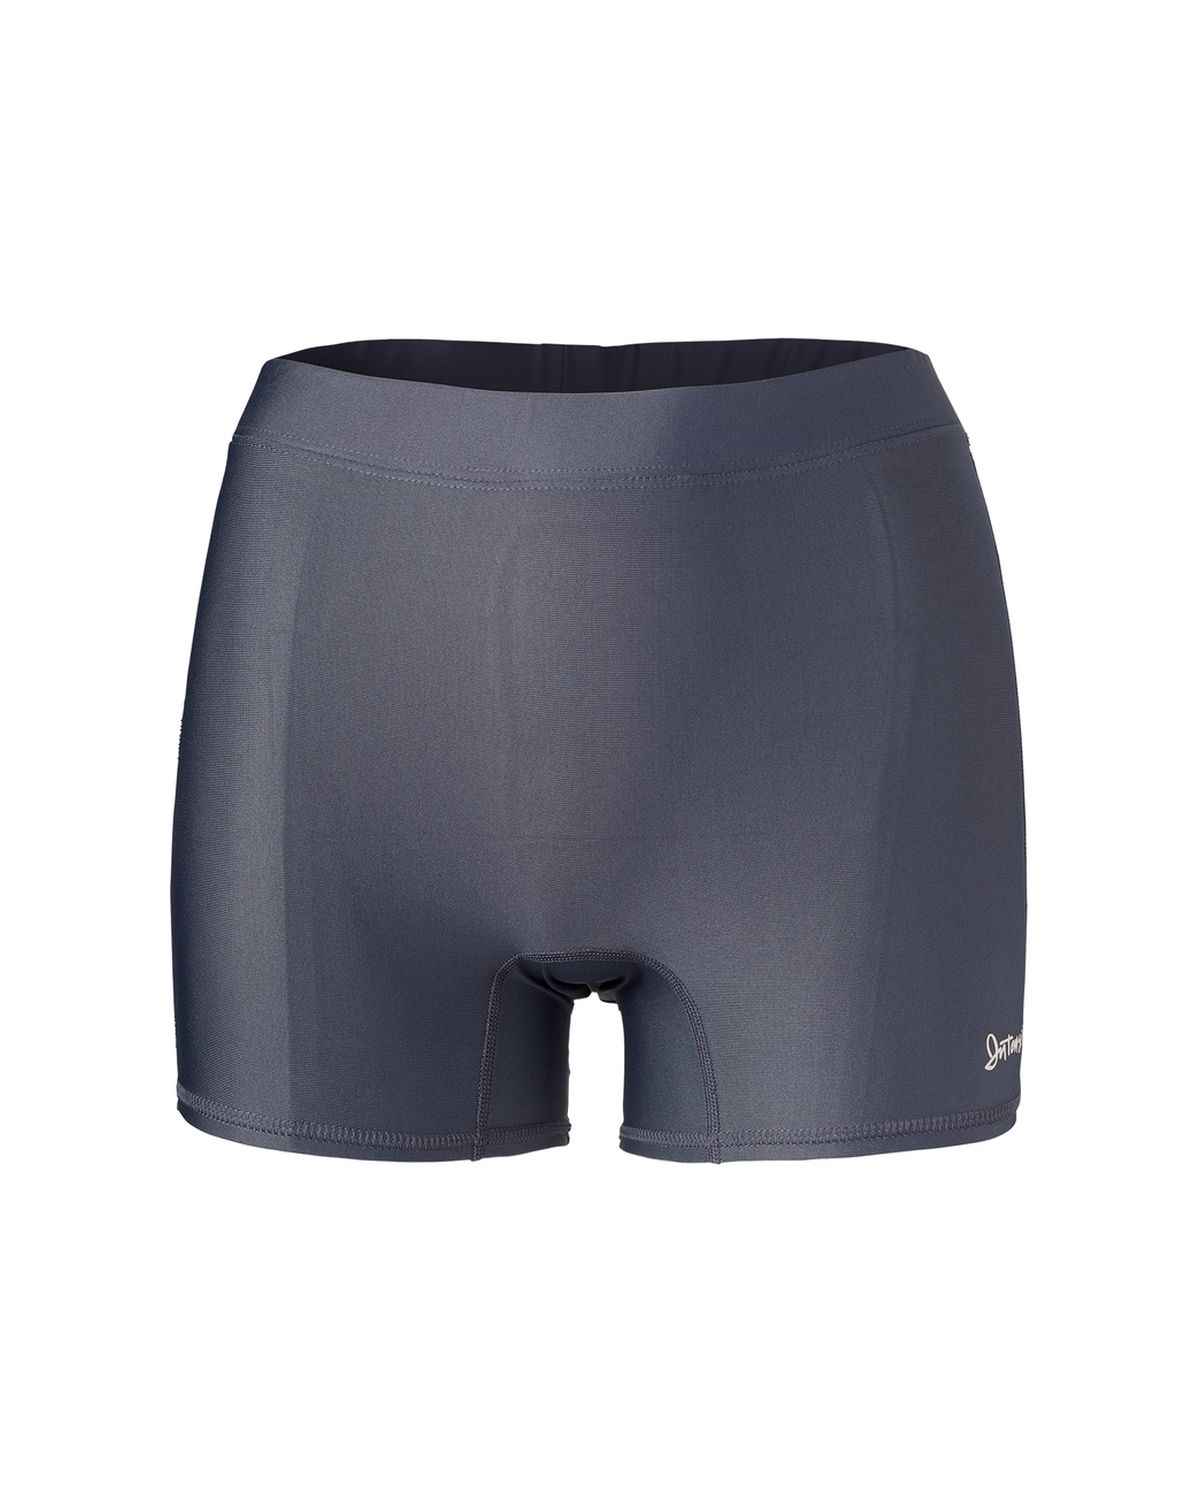 'Soffe N8103W Womens Ace 4 Inch Volleyball Shorts'